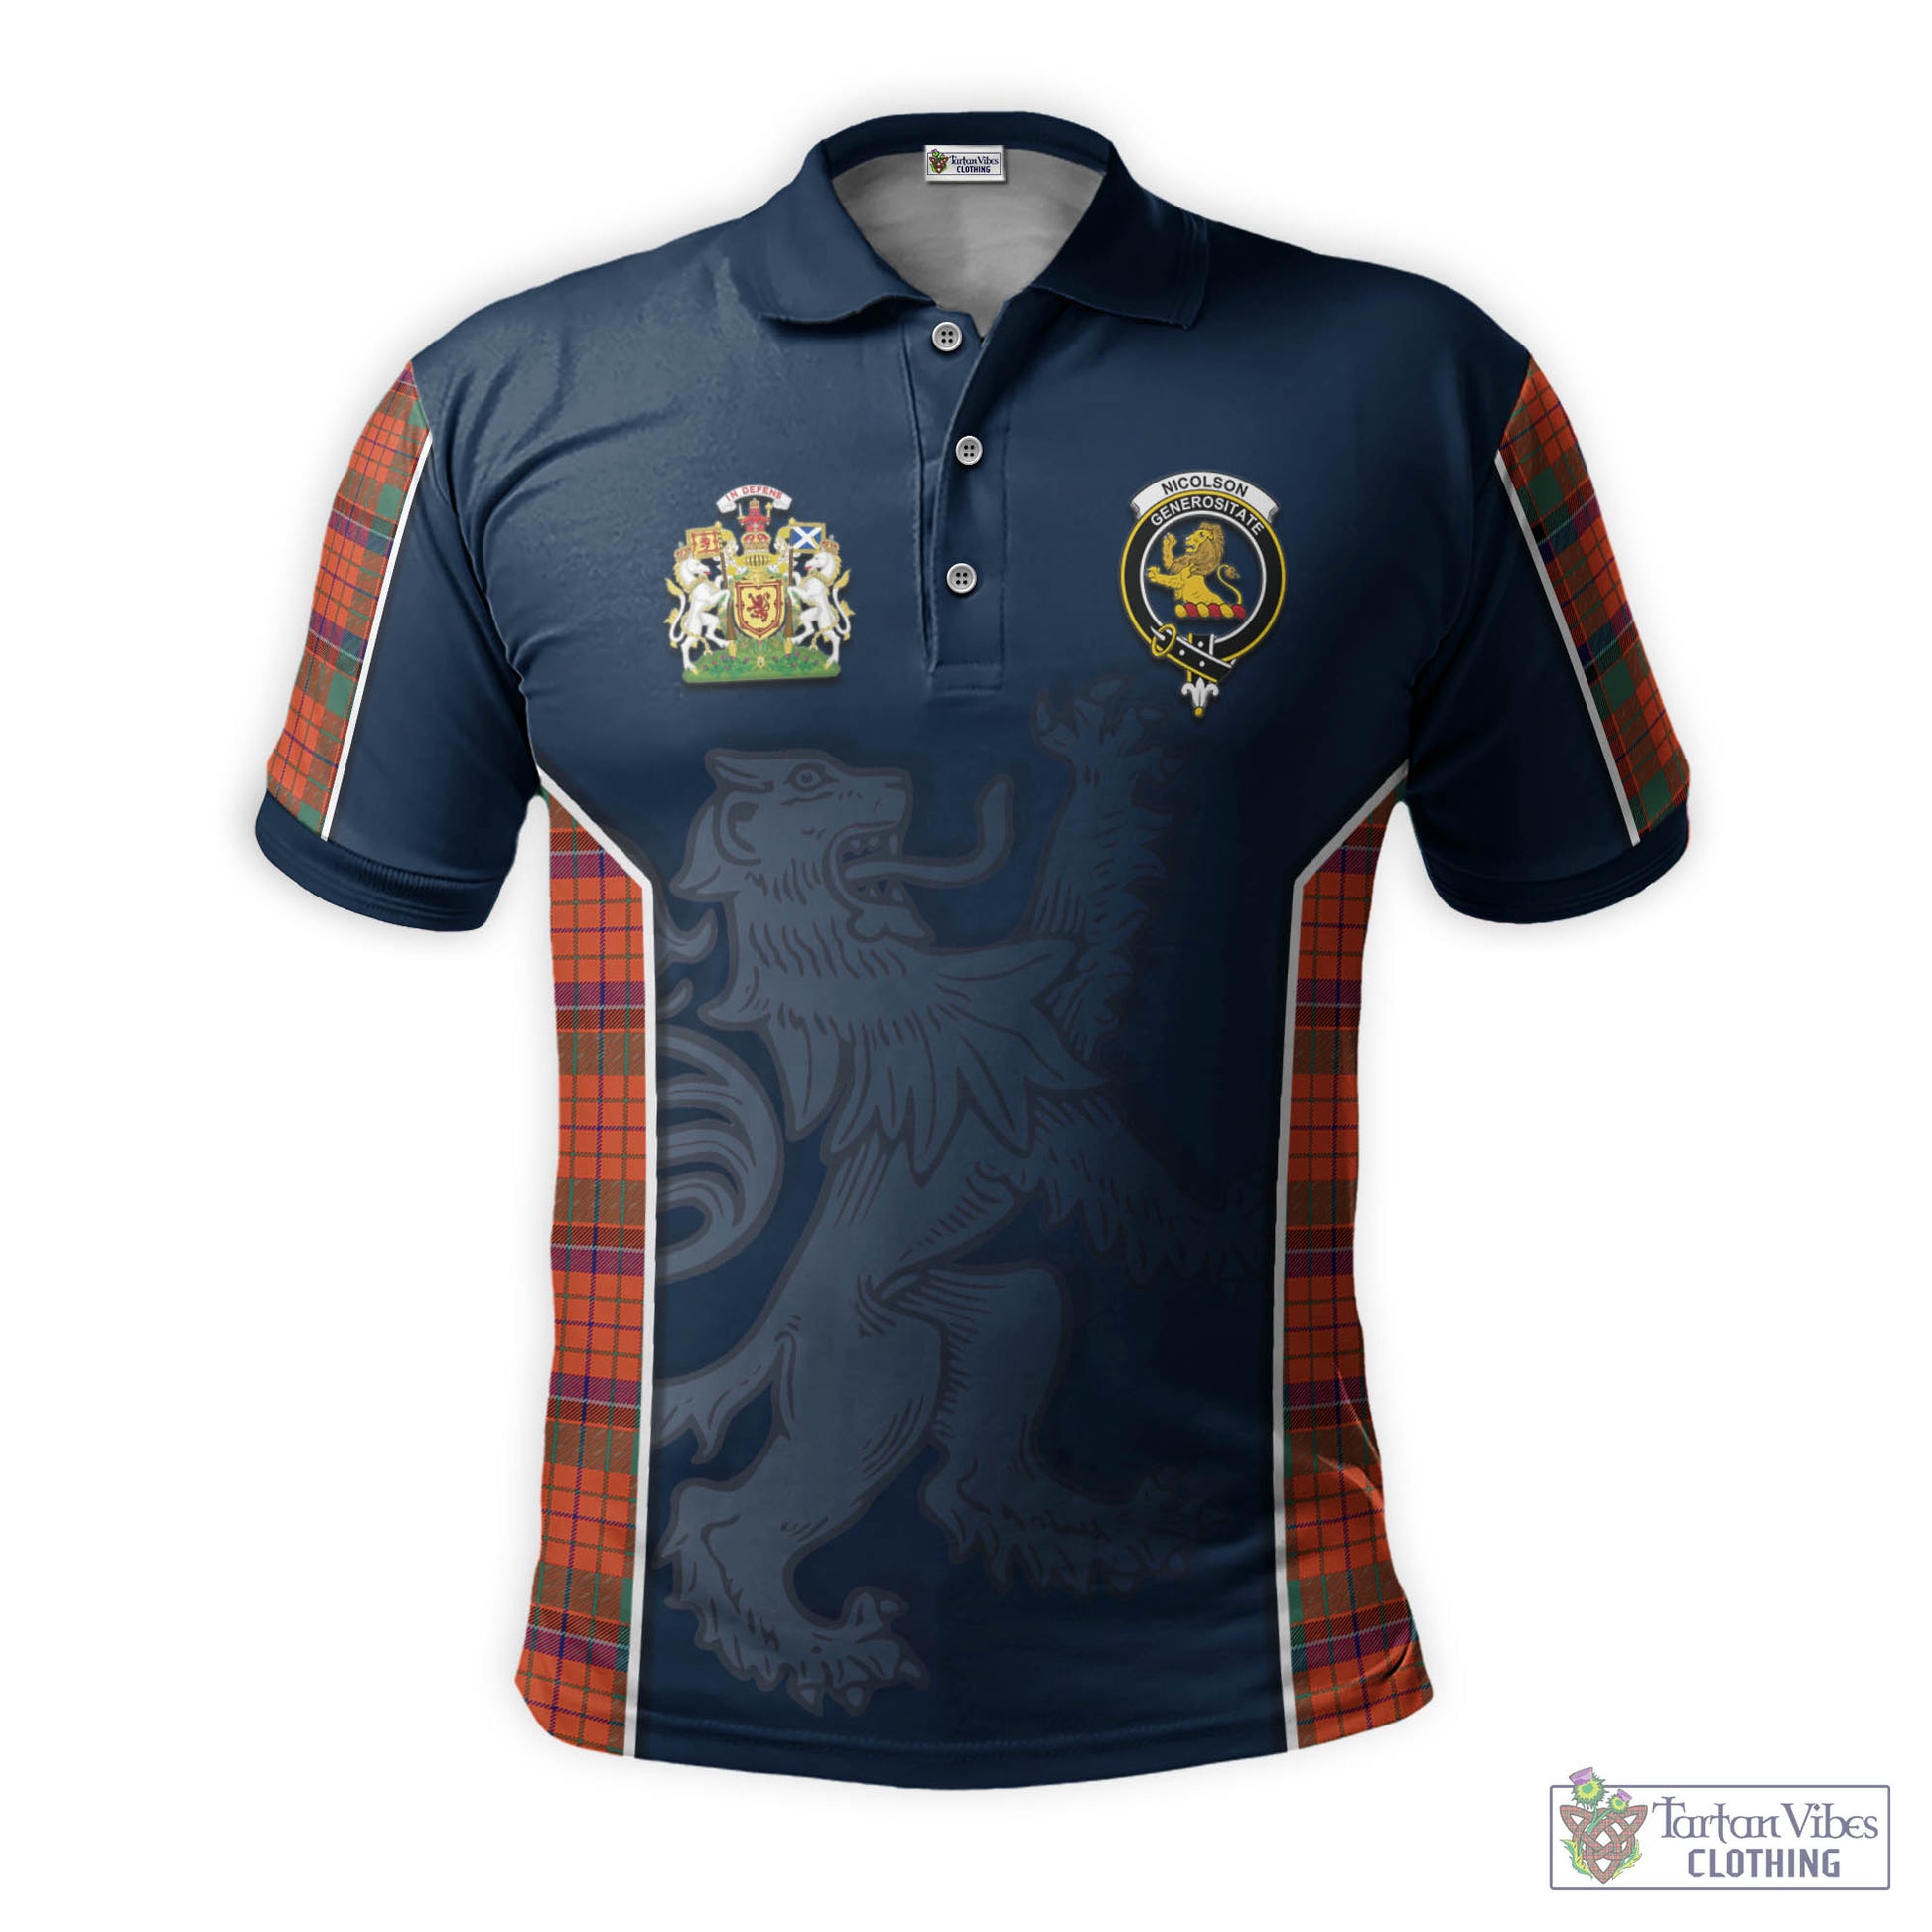 Tartan Vibes Clothing Nicolson Ancient Tartan Men's Polo Shirt with Family Crest and Lion Rampant Vibes Sport Style